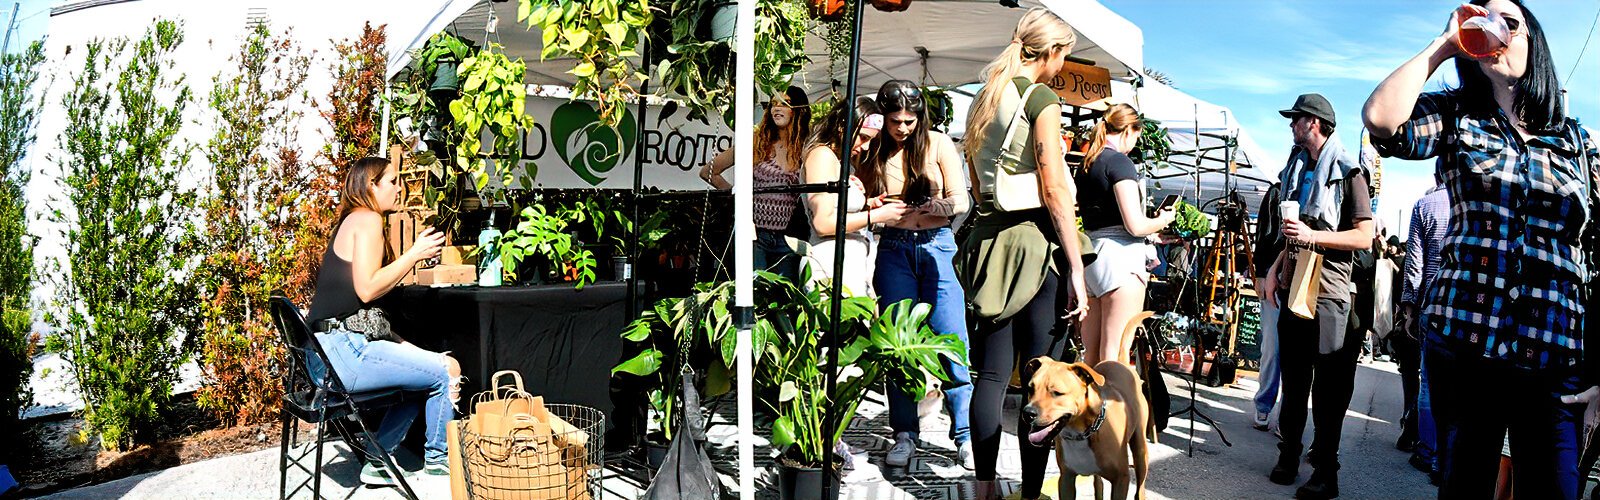 The Wild Roots plant haven is present at the Indie Flea, helping people to add more green to their lives with a botanical selection of houseplants, succulents and tropicals.